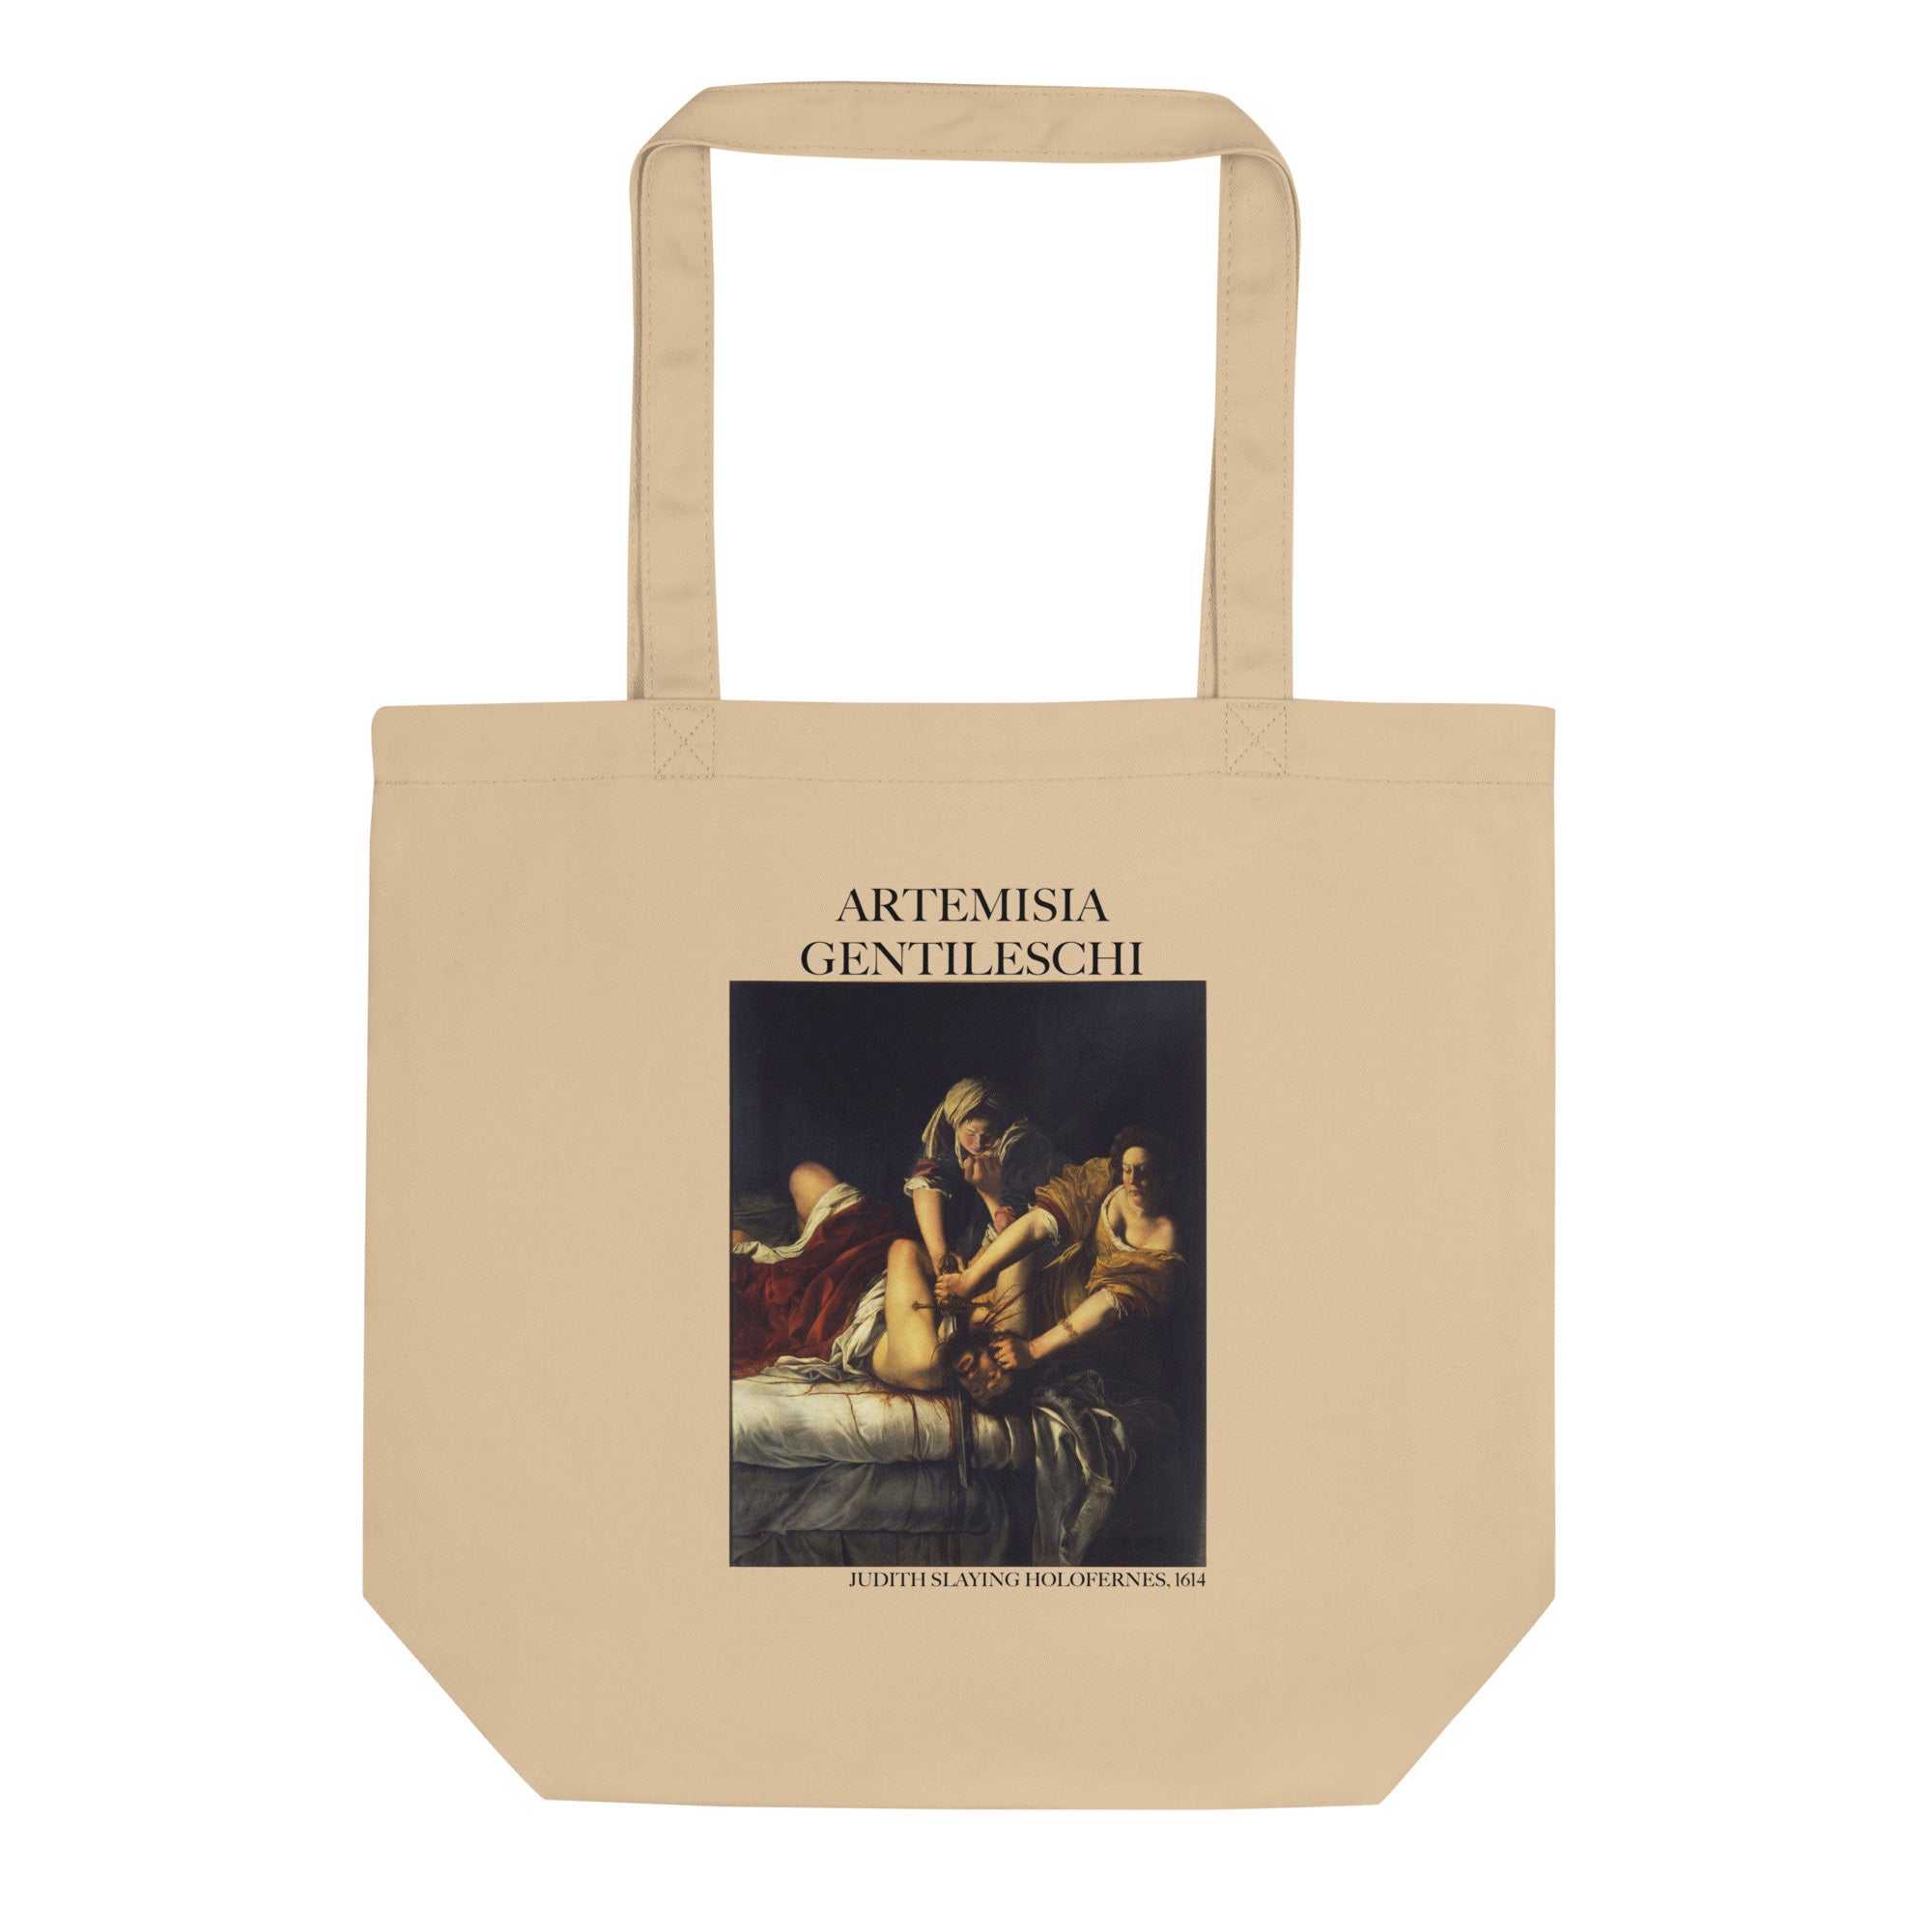 Artemisia Gentileschi 'Judith Slaying Holofernes' Famous Painting Totebag | Eco Friendly Art Tote Bag